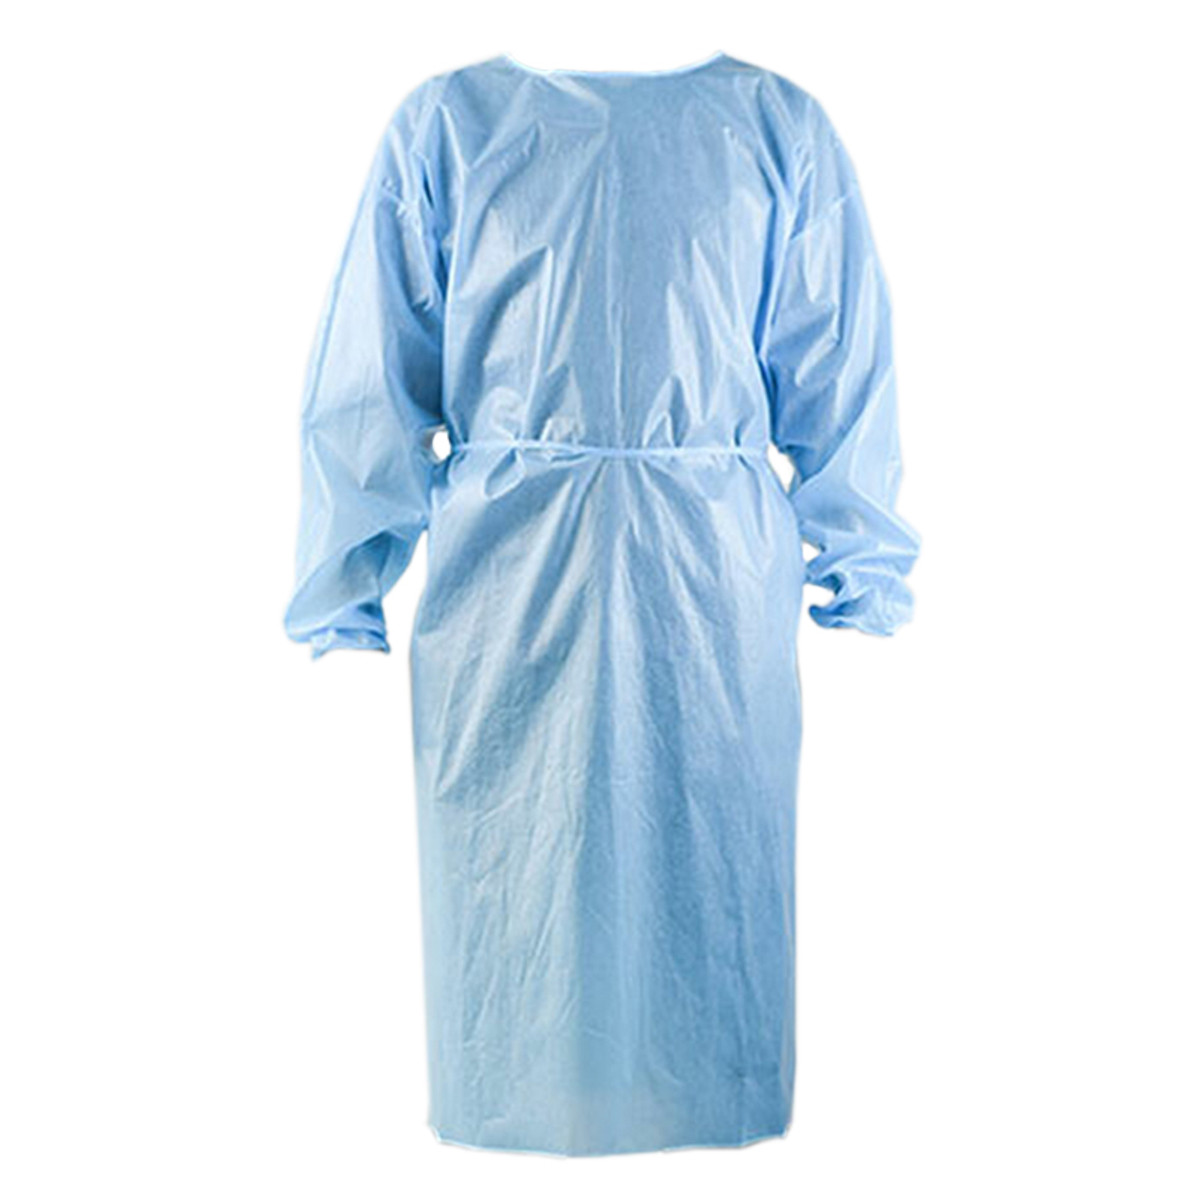 PDF) The effects of two surgical gowning and gloving methods on the extent  of contamination of surgical team members' gowns and gloves: A single-blind  controlled trial